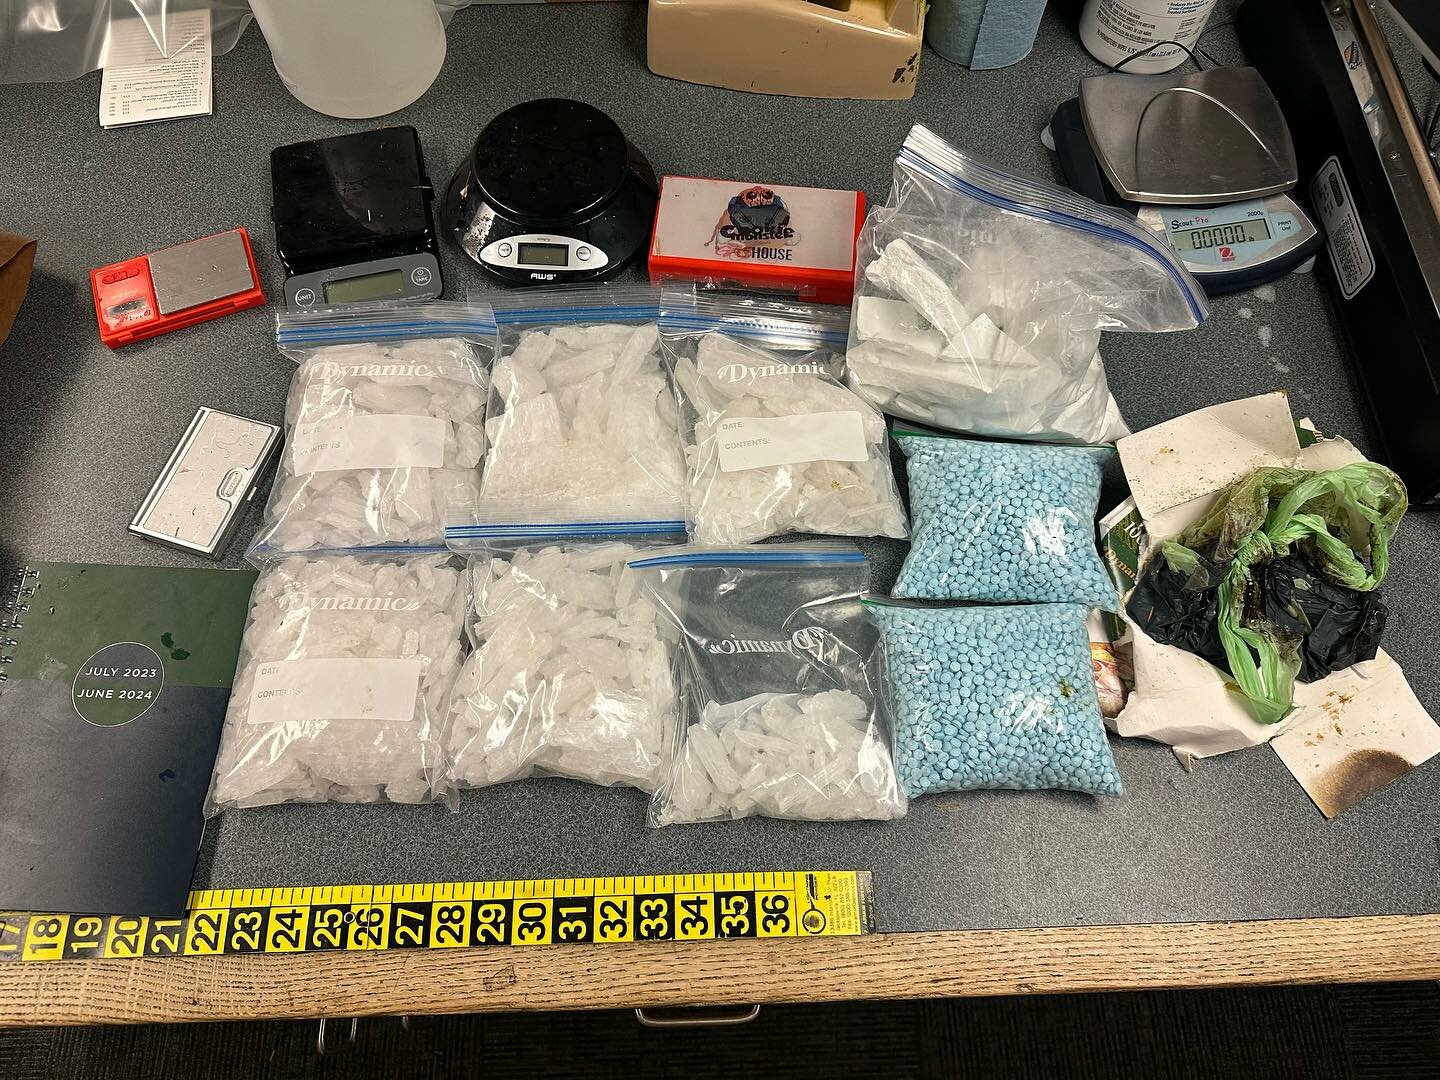 "Did you lose a bag of drugs at Wonderwood Park?" The Lacey Police Department wrote on Facebook. "Patrol officers found a significant amount of methamphetamine, heroin and fentanyl at the park last week, and if it's yours, give us a call! We just wanna talk!"